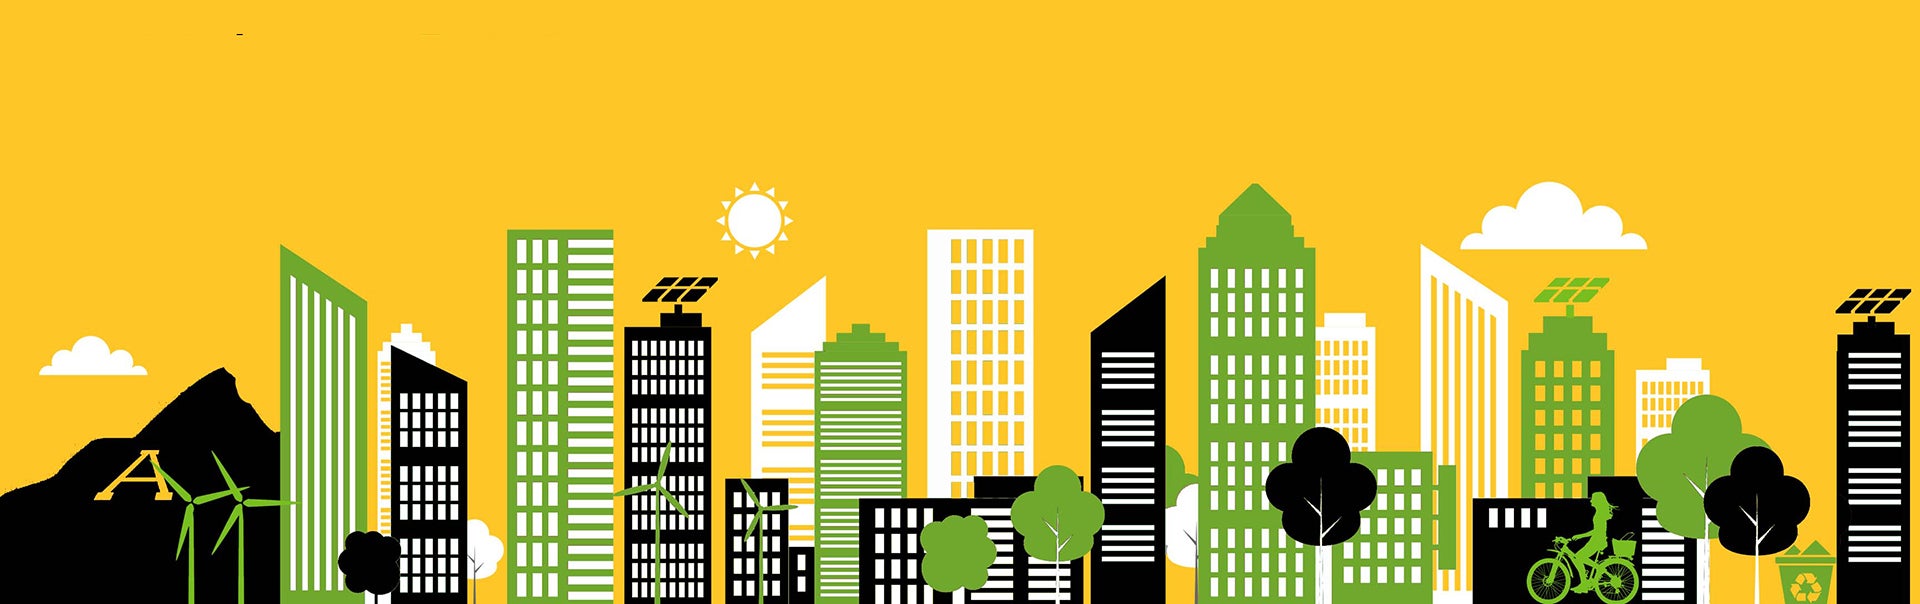 Graphic illustration of buildings and ASU landmarks for sustainability